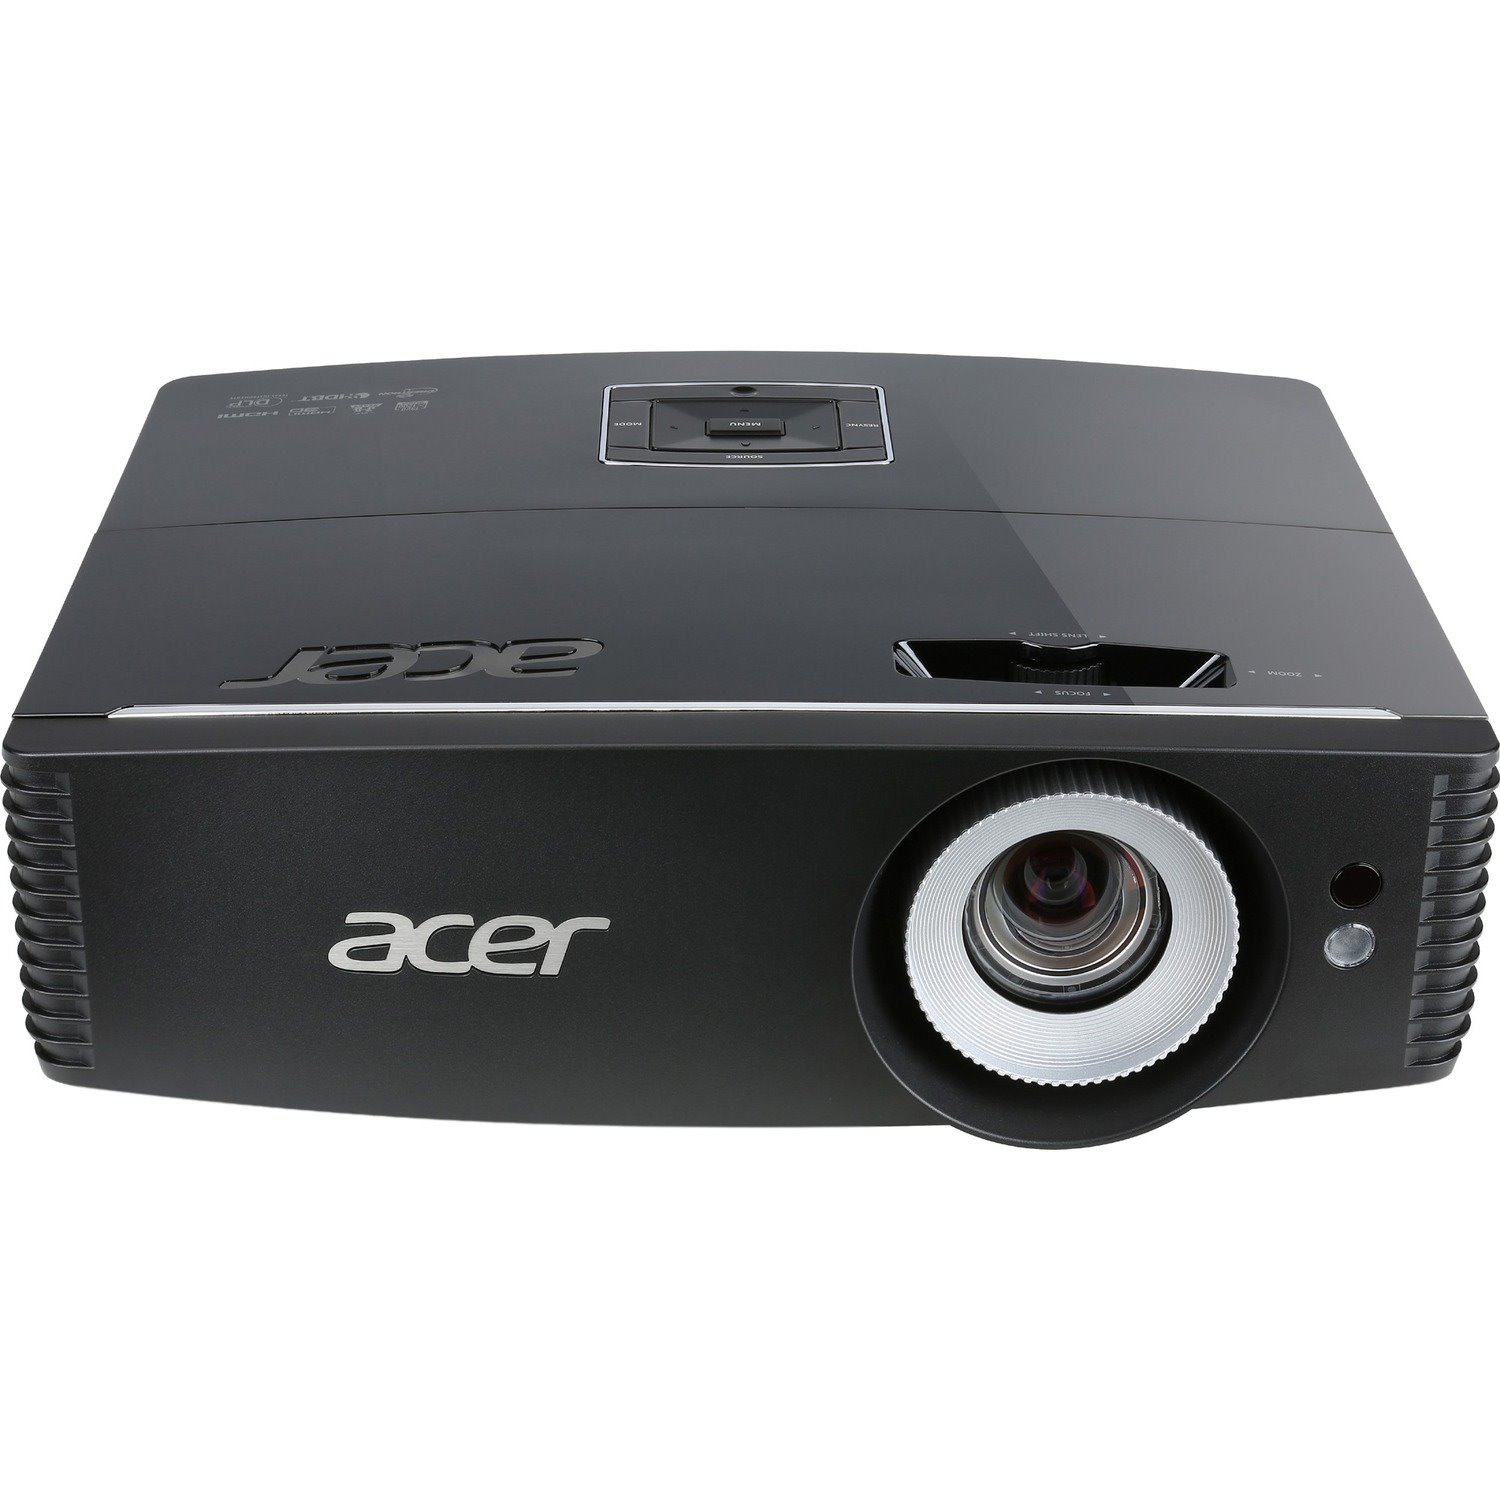 Acer P6605 DLP Projector - 16:10 - Ceiling Mountable